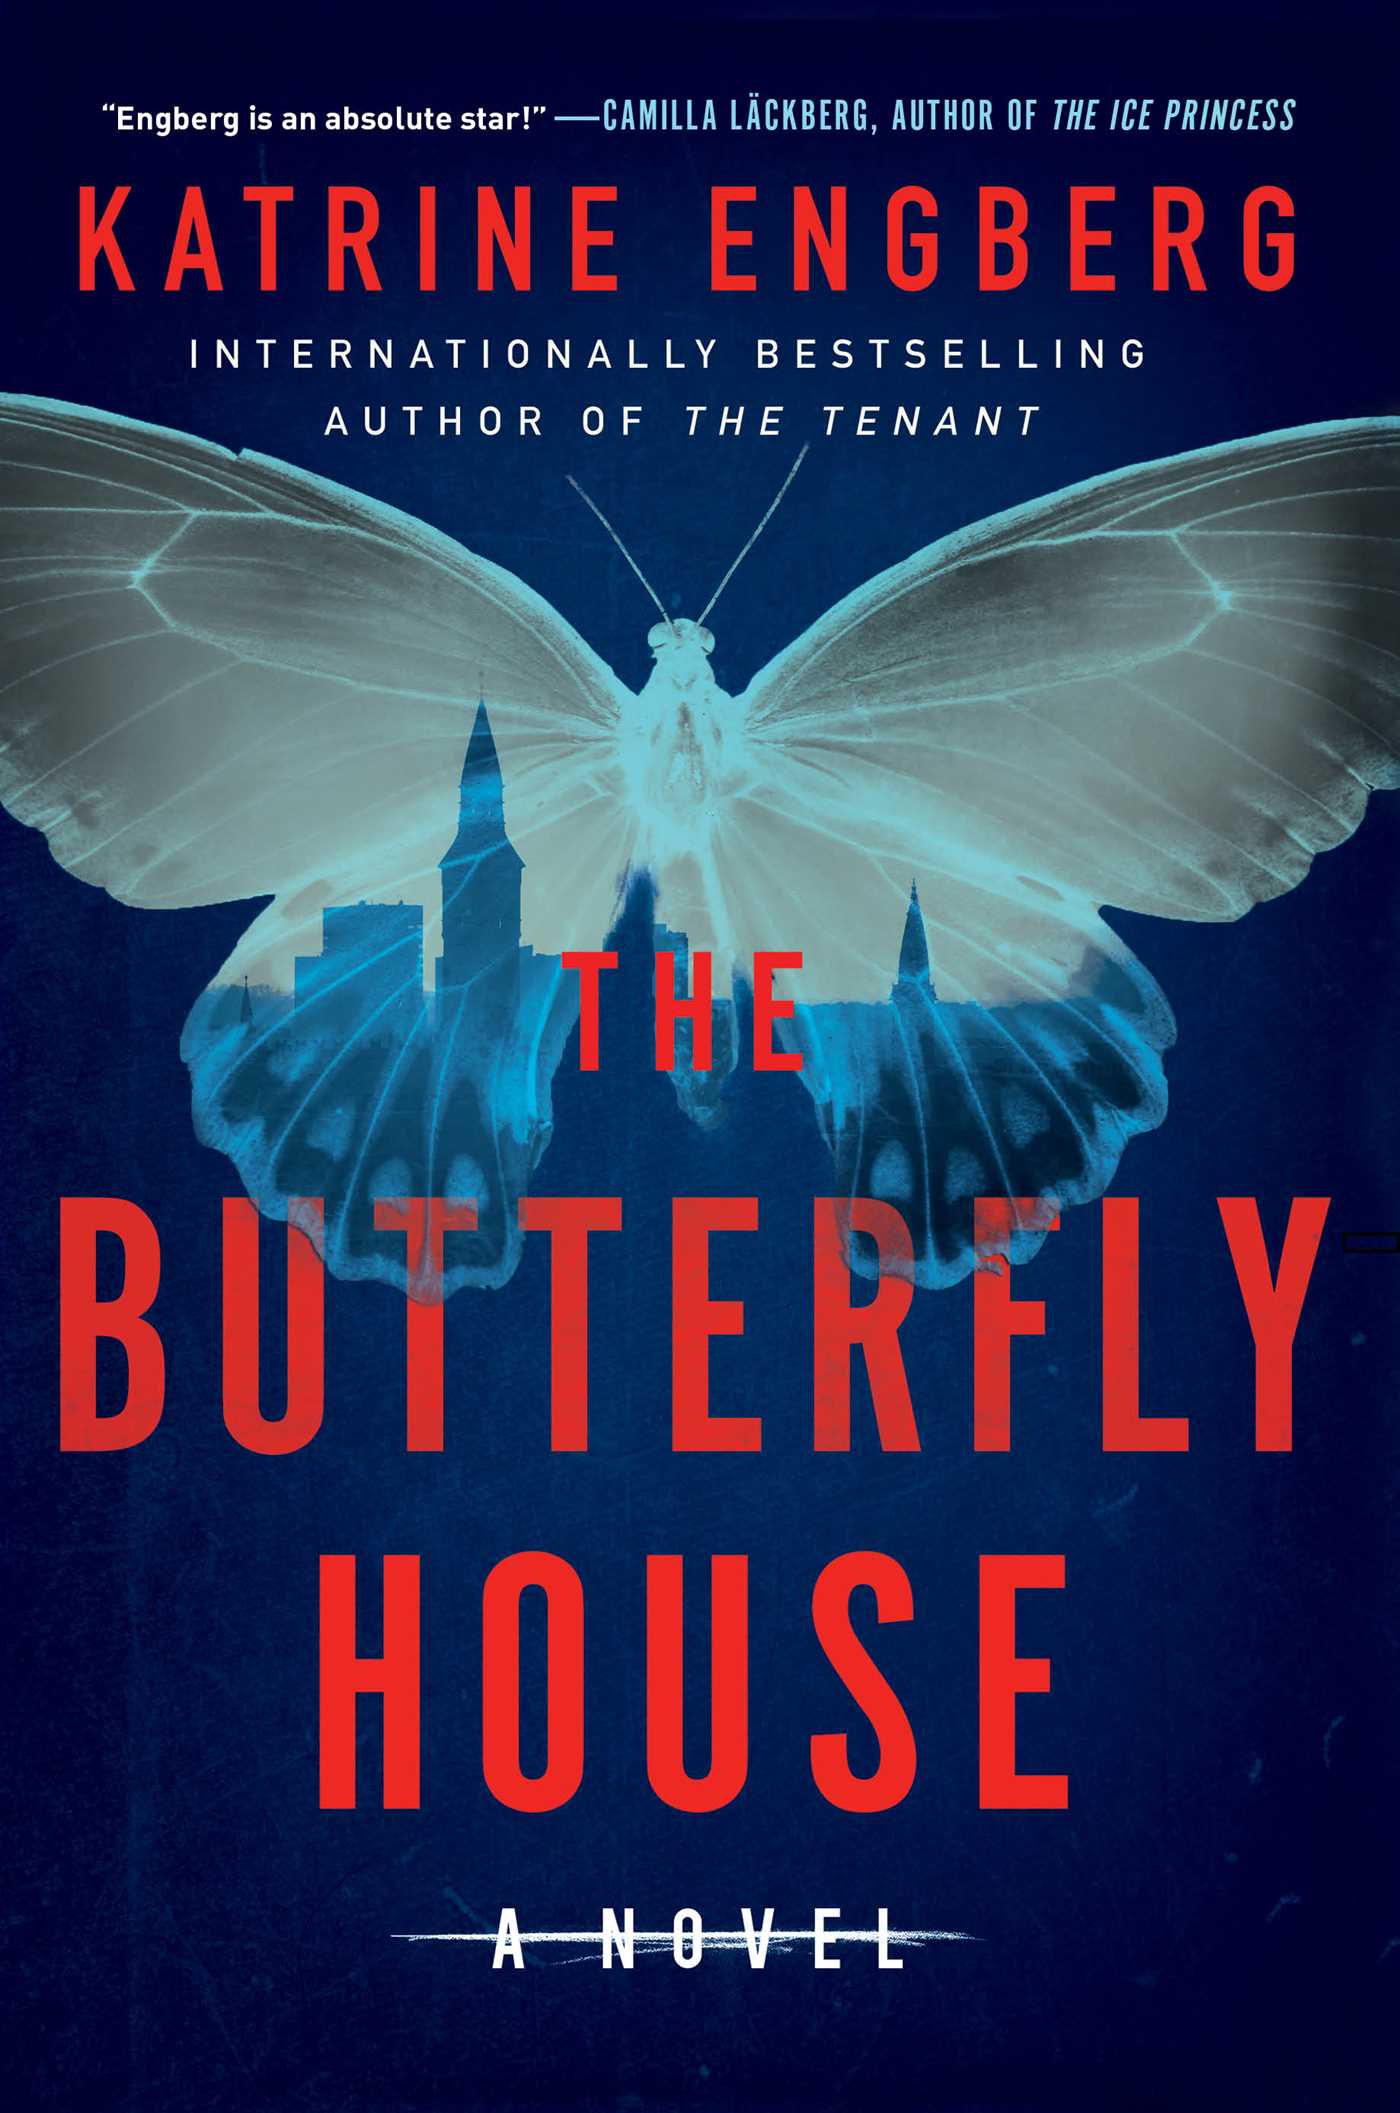 [EPUB] Kørner and Werner #3 The Butterfly House by Katrine Engberg